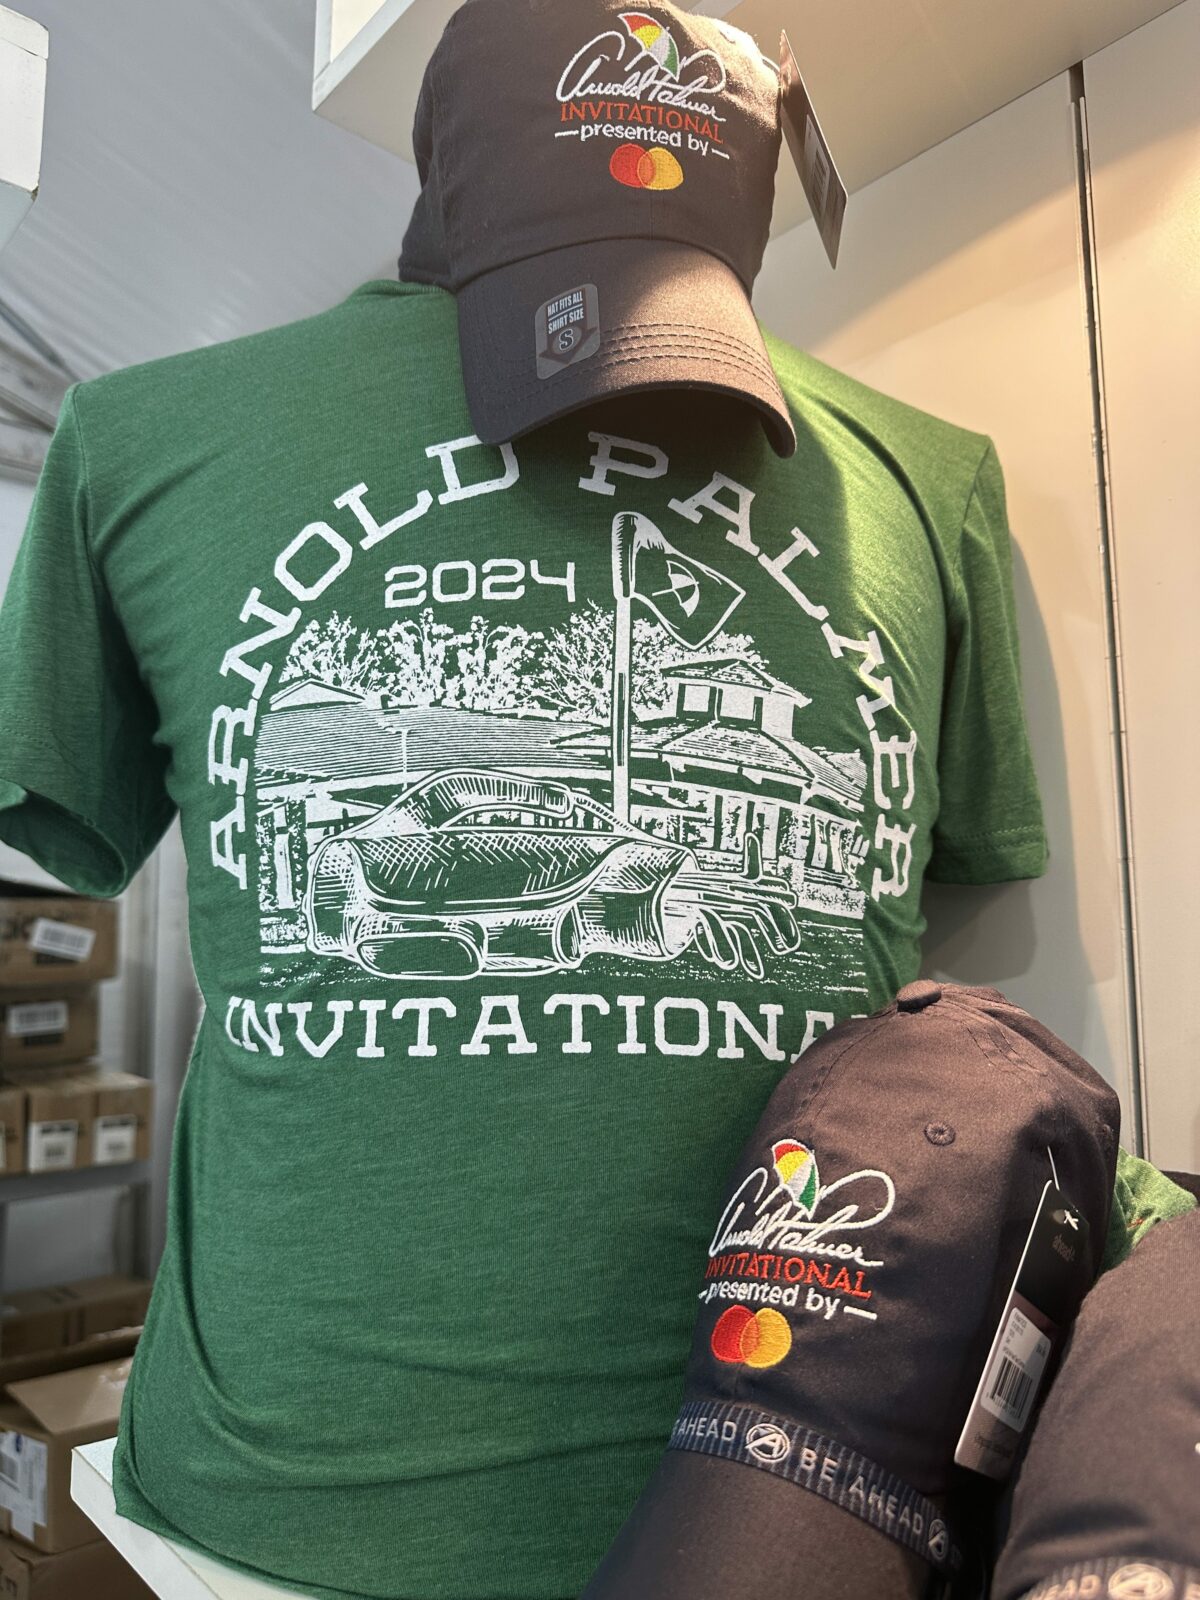 Arnold Palmer Invitational still in a class by itself for best PGA Tour merchandise